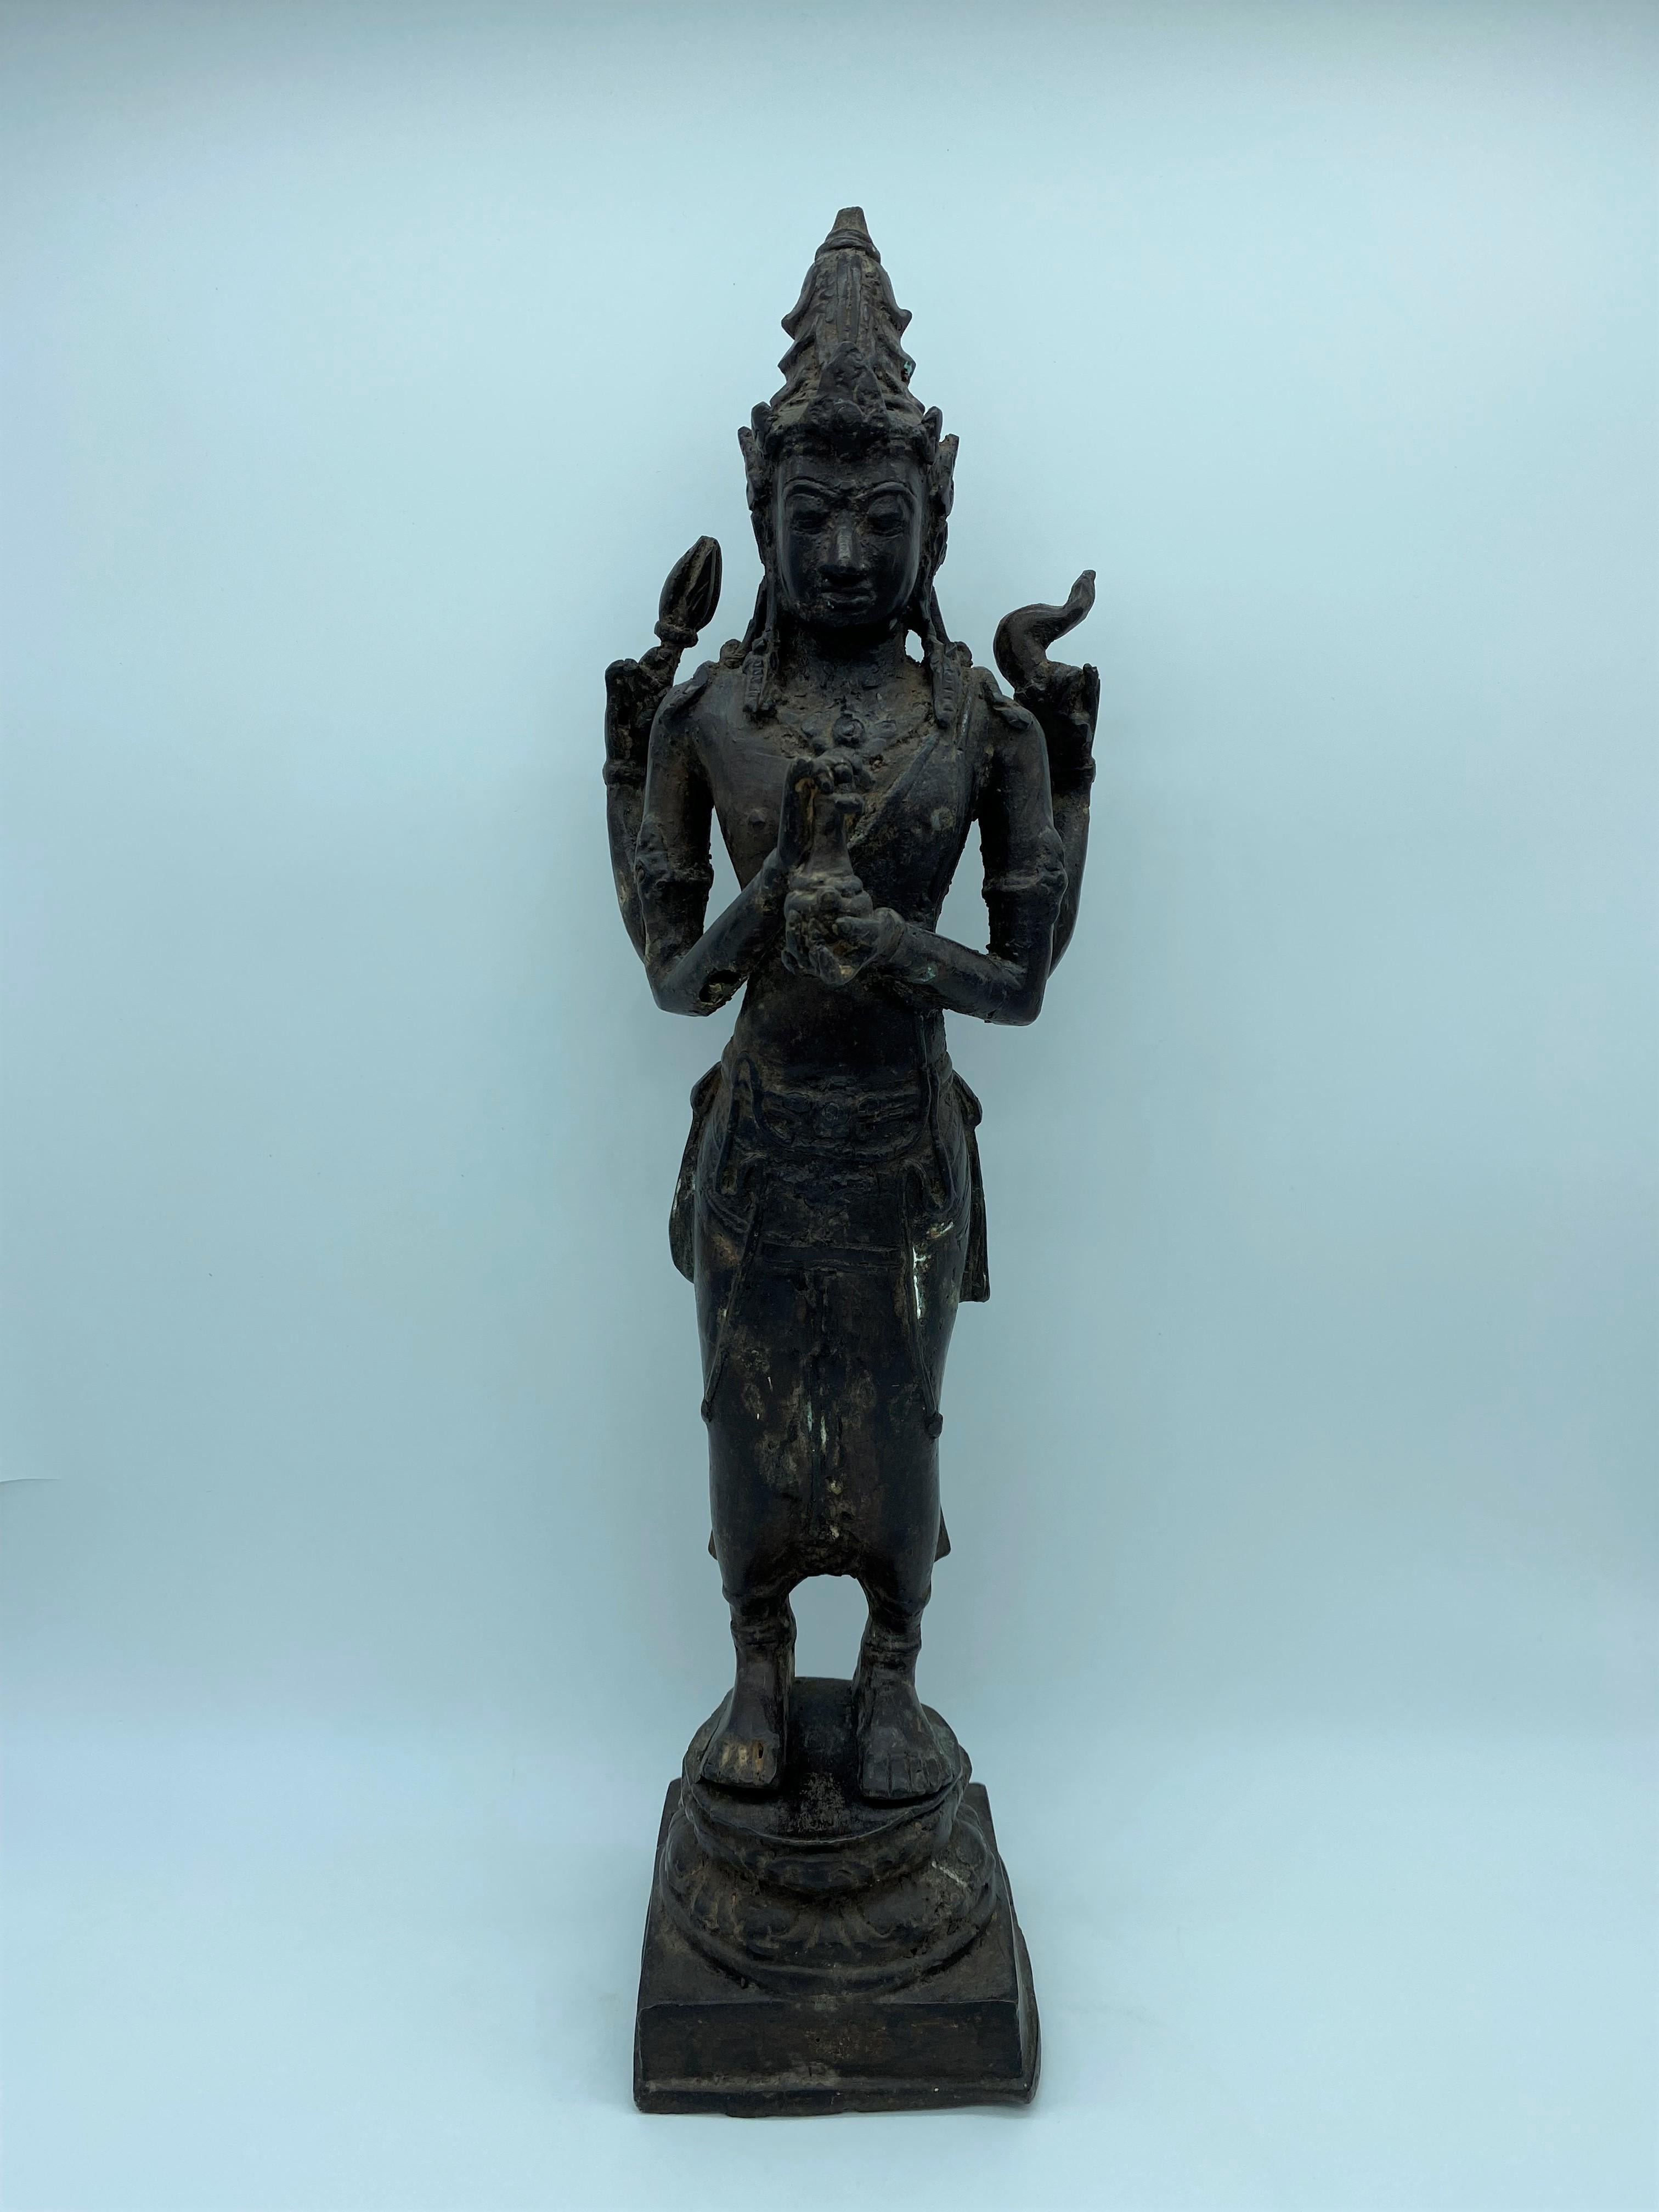 Very beautiful realization of a chiseled bronze deity of the Khmer art in Cambodia, a production of the 20th century. 
This statue probably represents the deity Vishnu, part of the Brahmanic triad (composed of Shiva, Brahma and Vishnu). He holds in